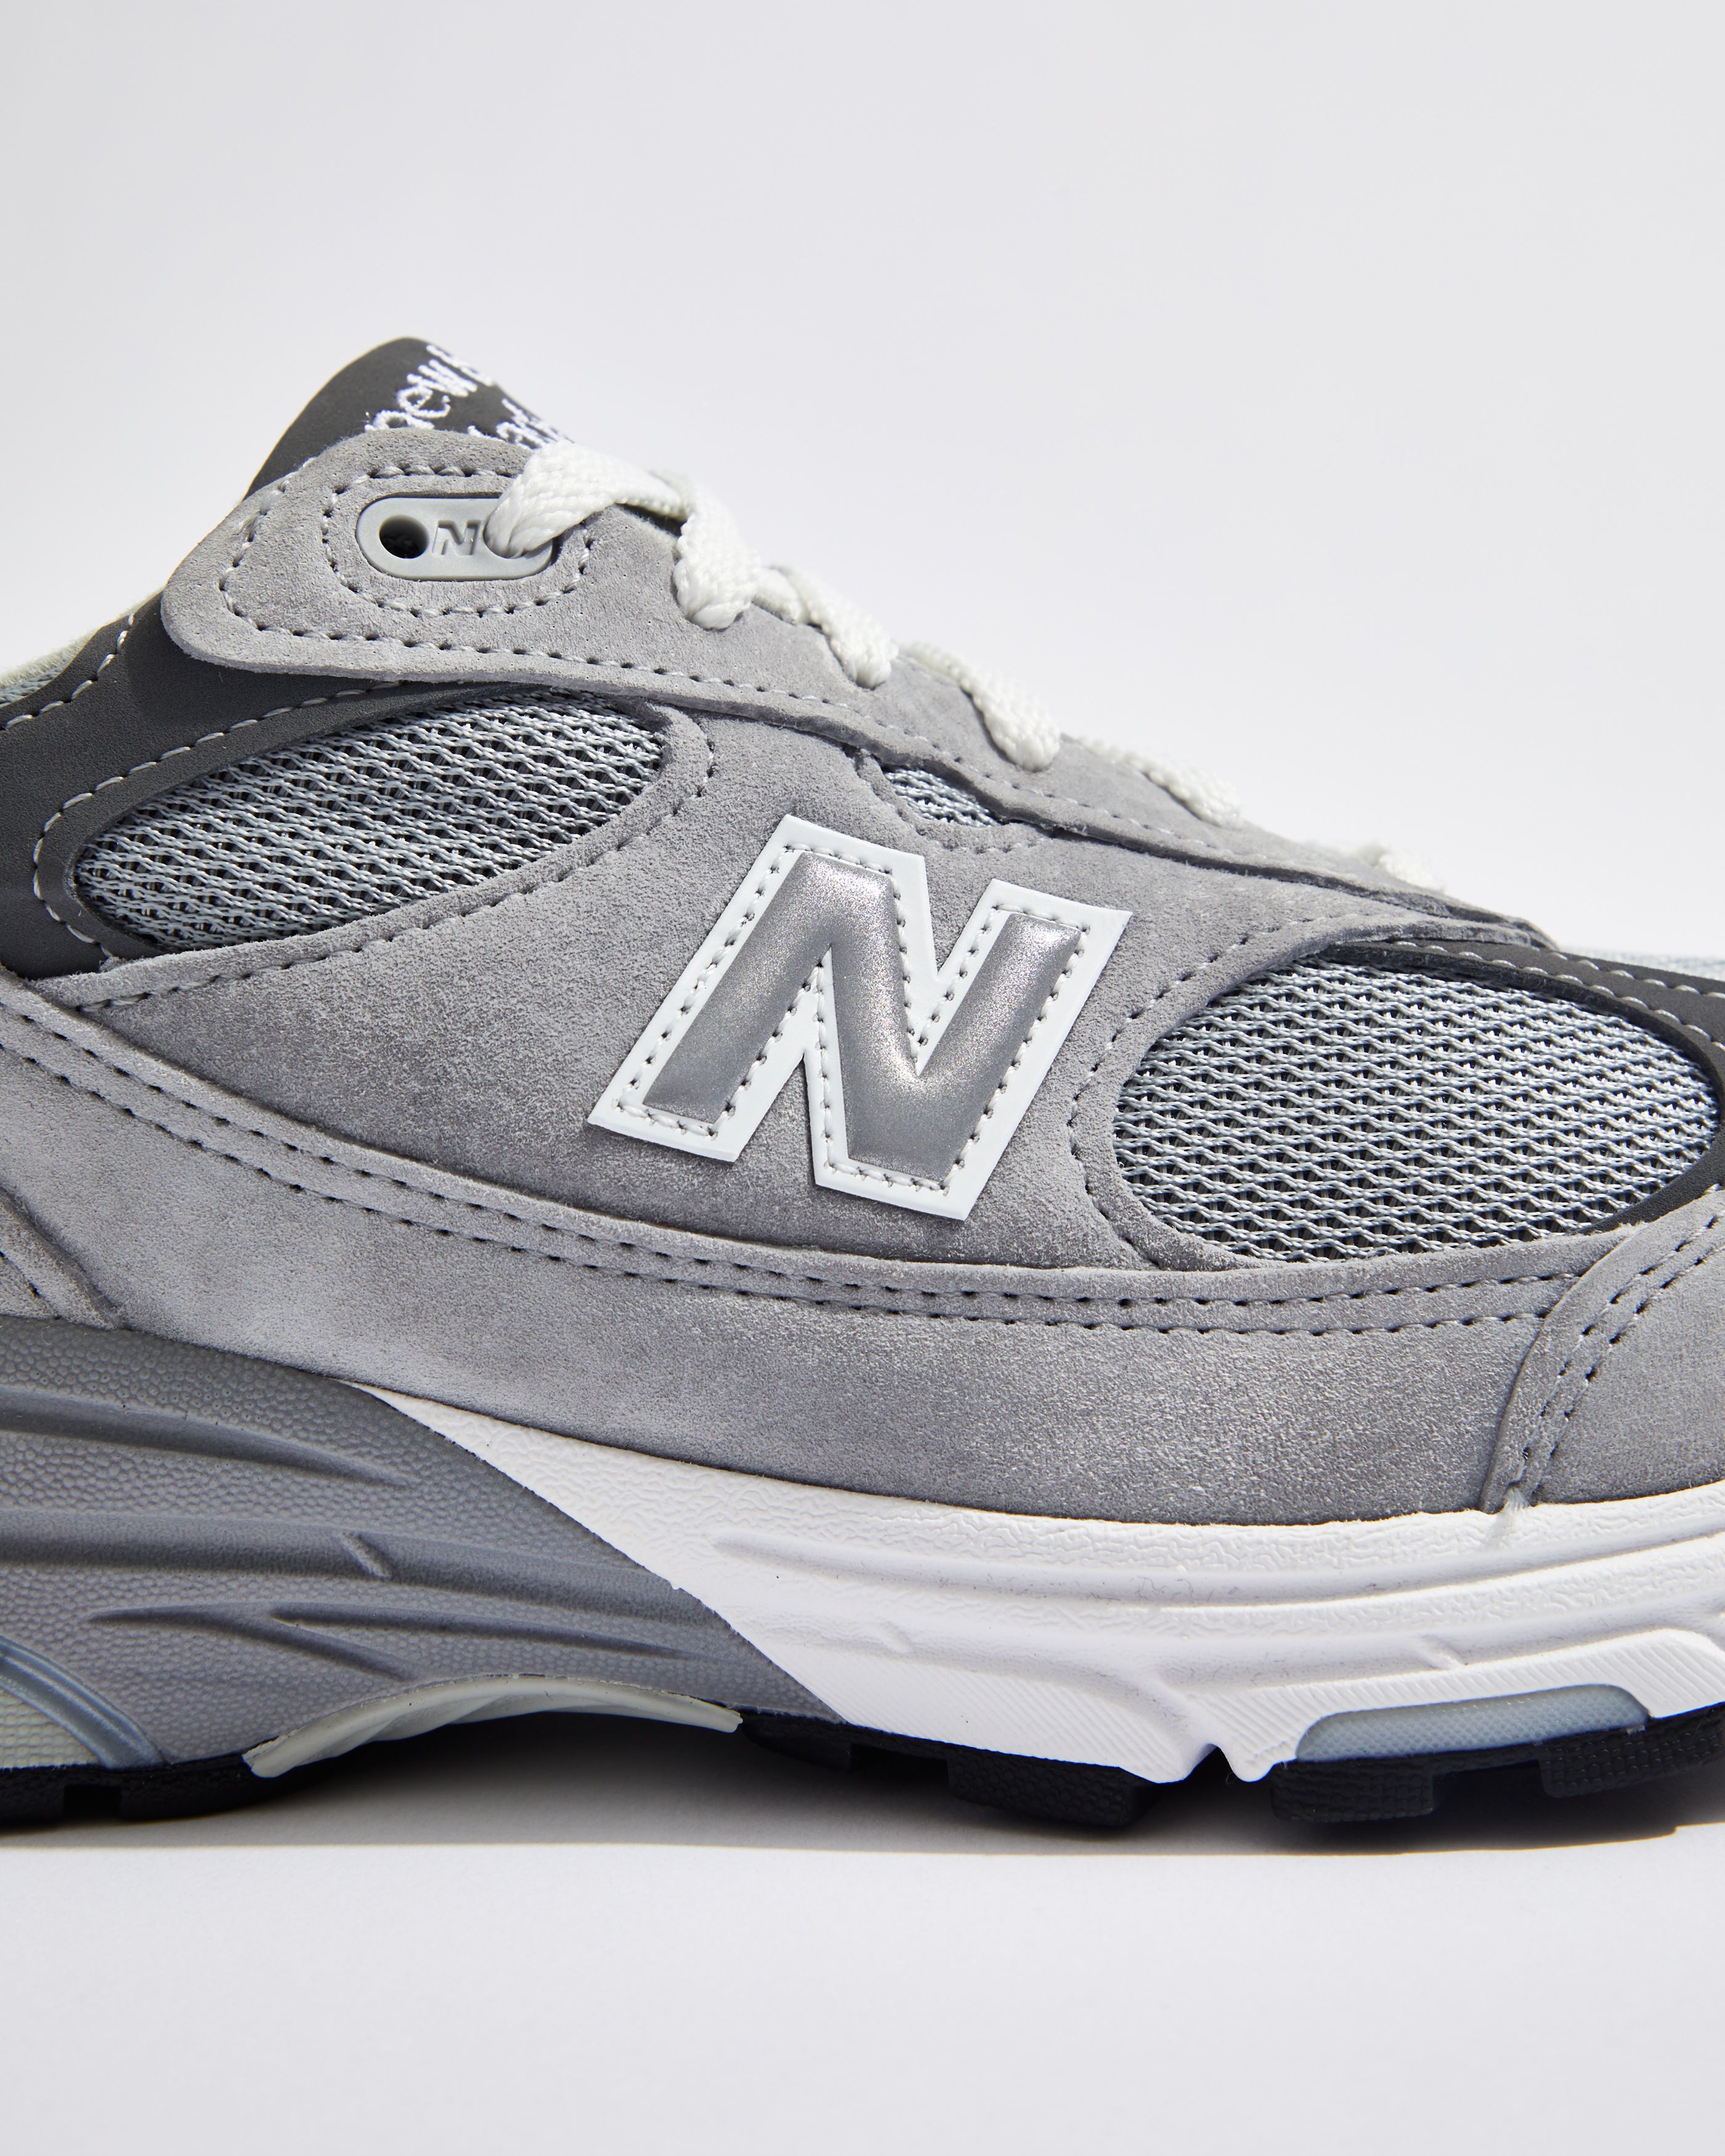 vertraging Academie Optimisme New Balance 993 Made in US Sneaker Review, Price and Where to Buy